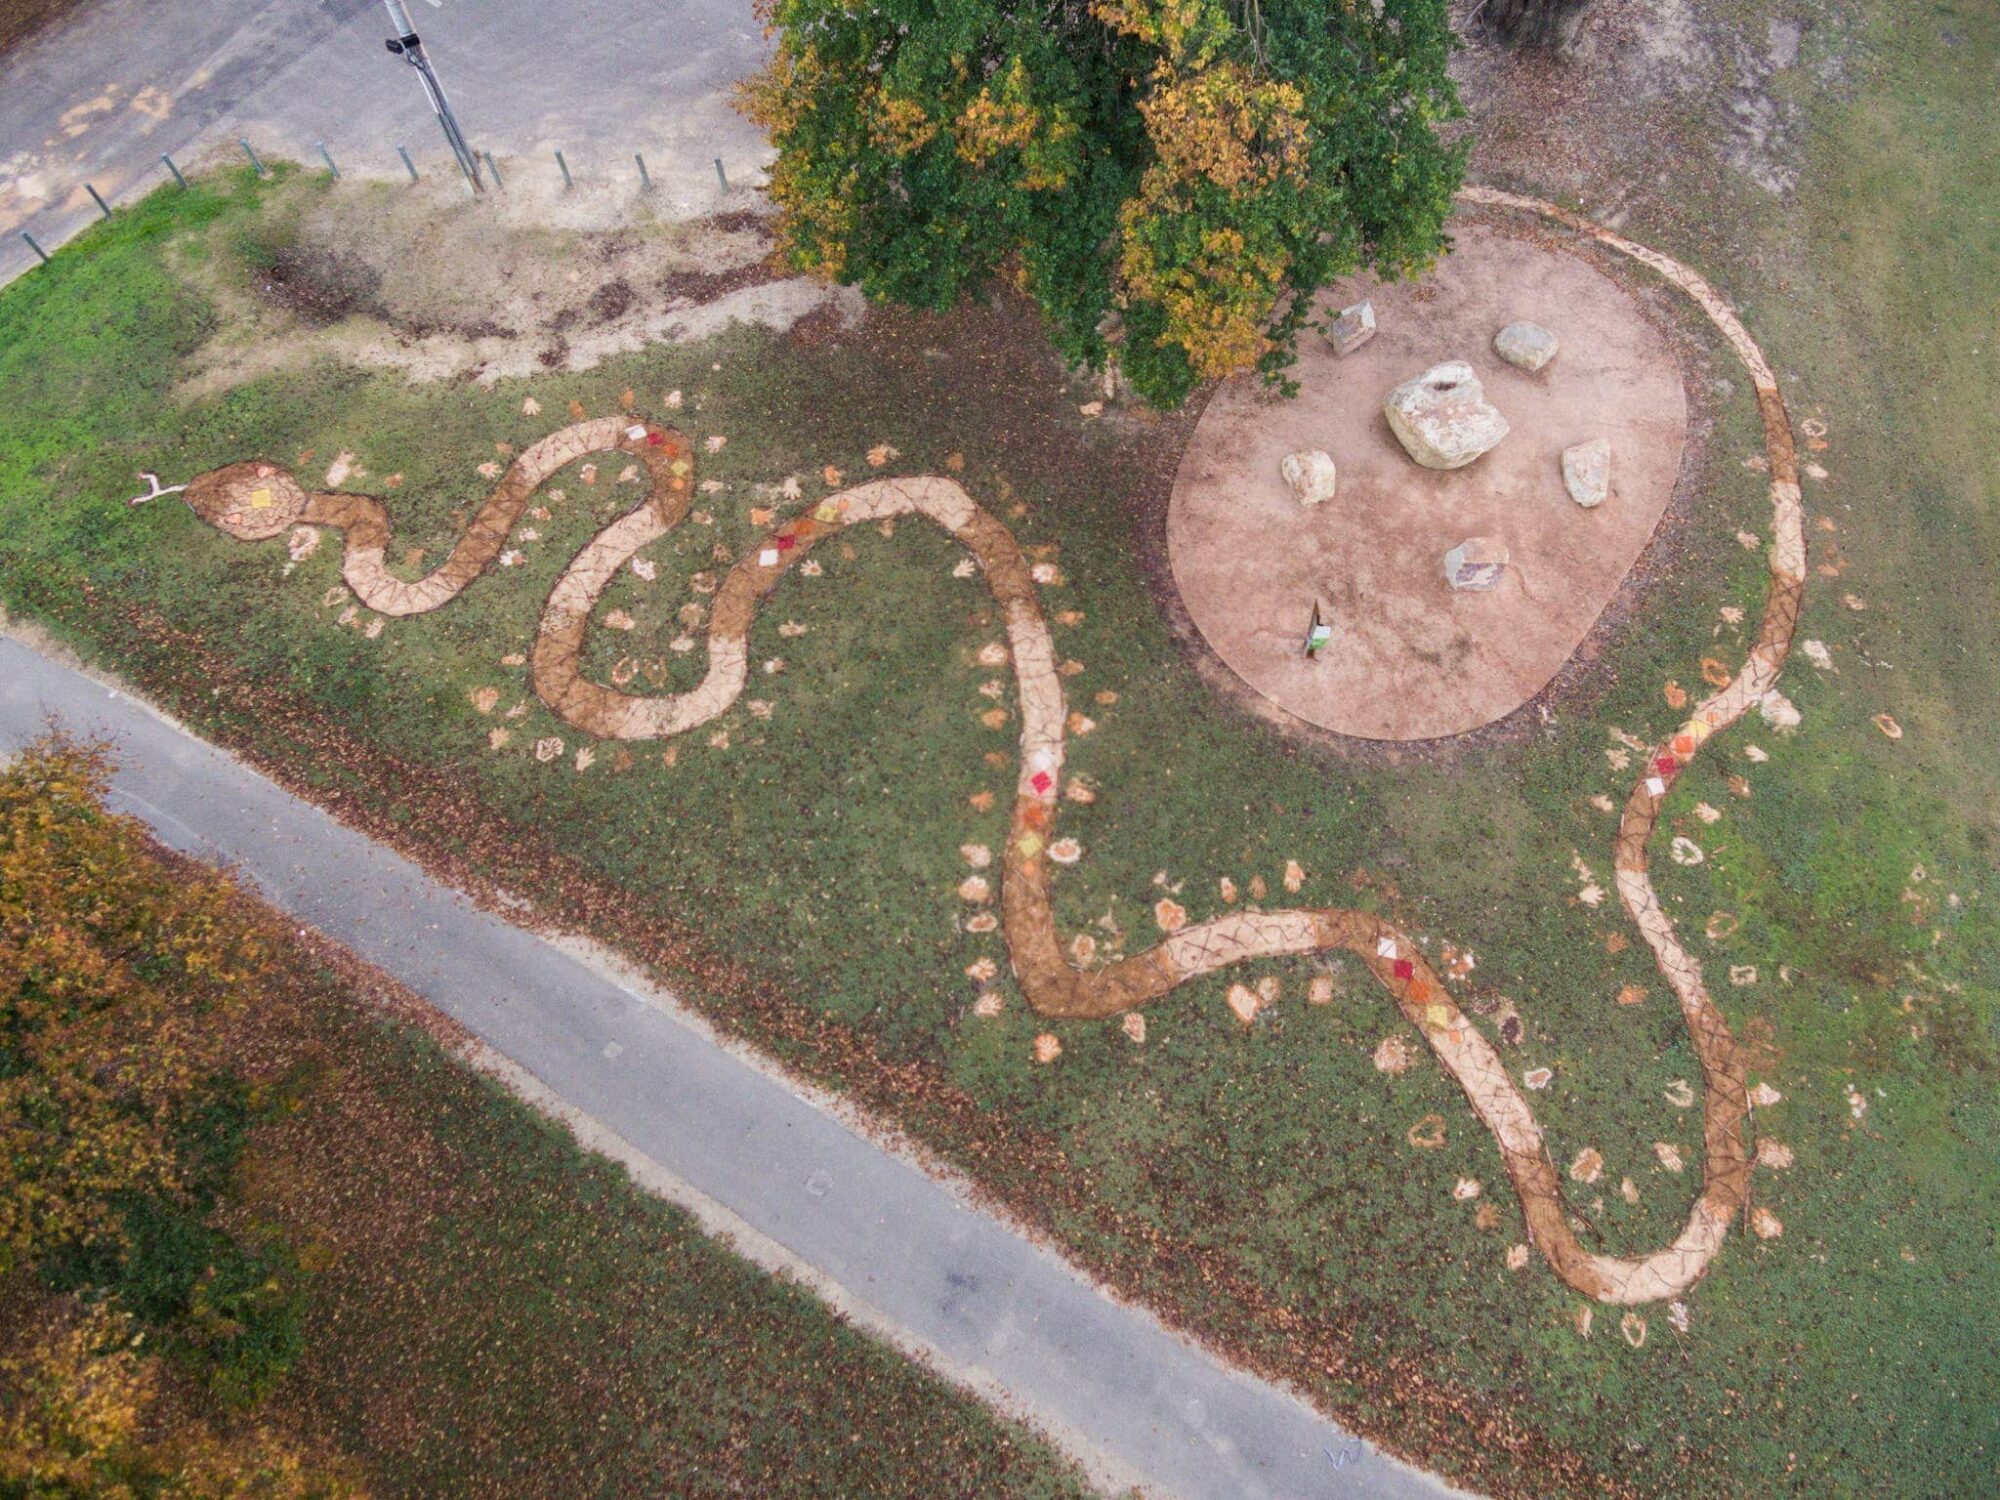 Aerial View of serpent artwork, hand prints, brown, tan, cream, with diamonds of red, white & yellow